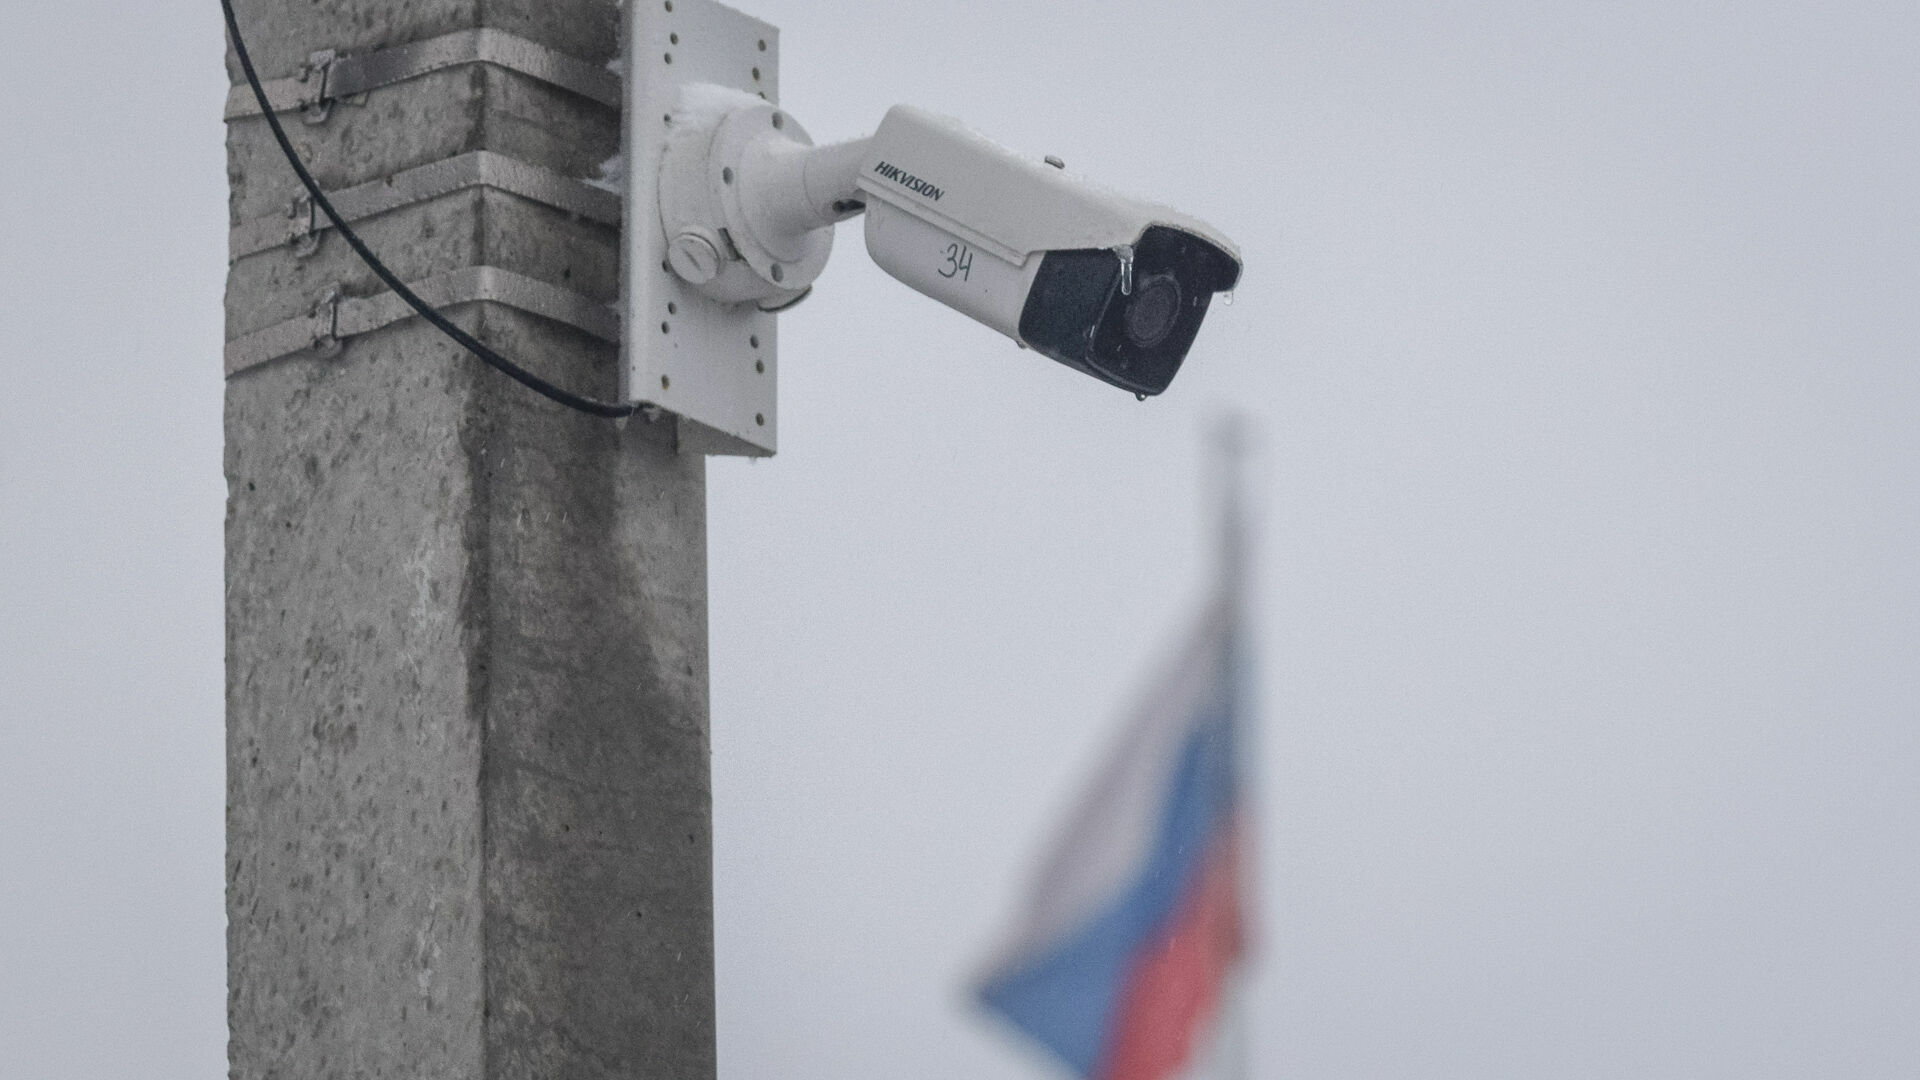 Kommersant: the government plans to create an unified video surveillance system